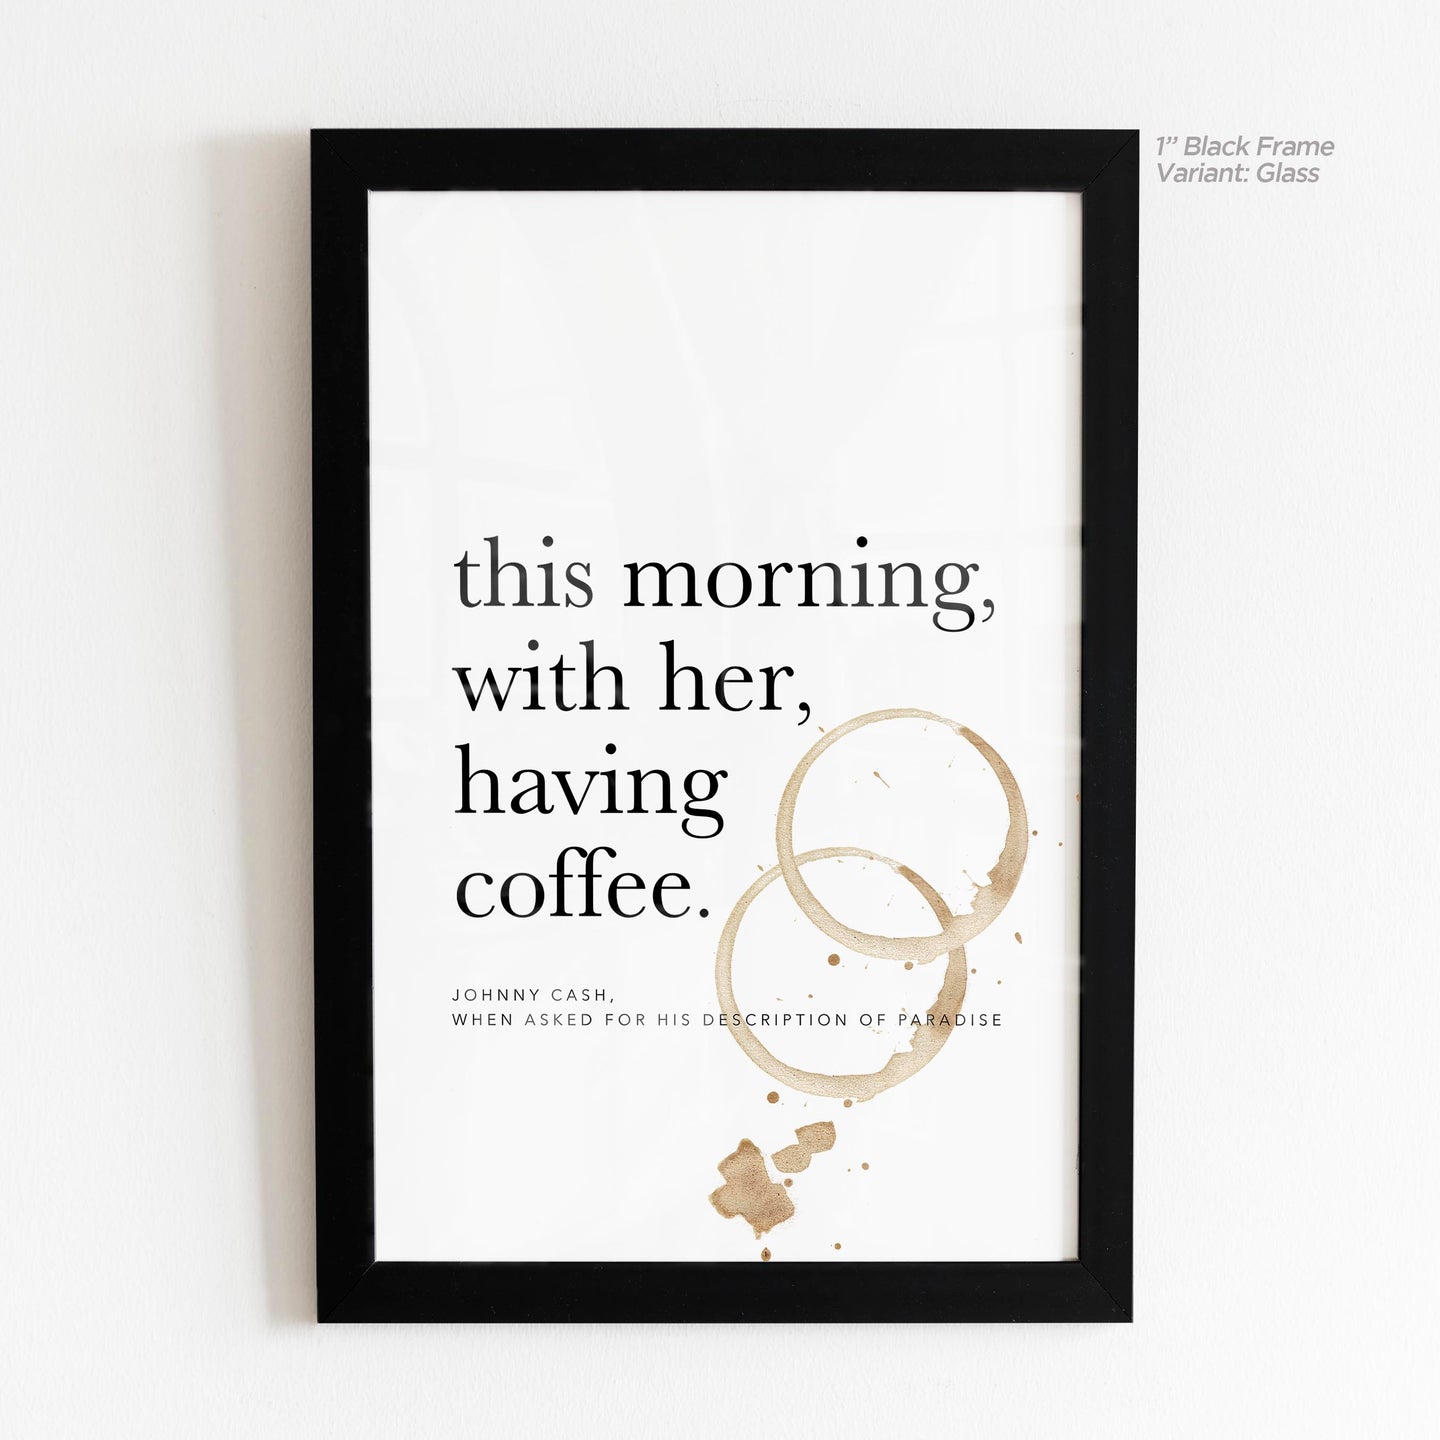 This Morning, With Her, Having Coffee - Johnny Cash Quote Art